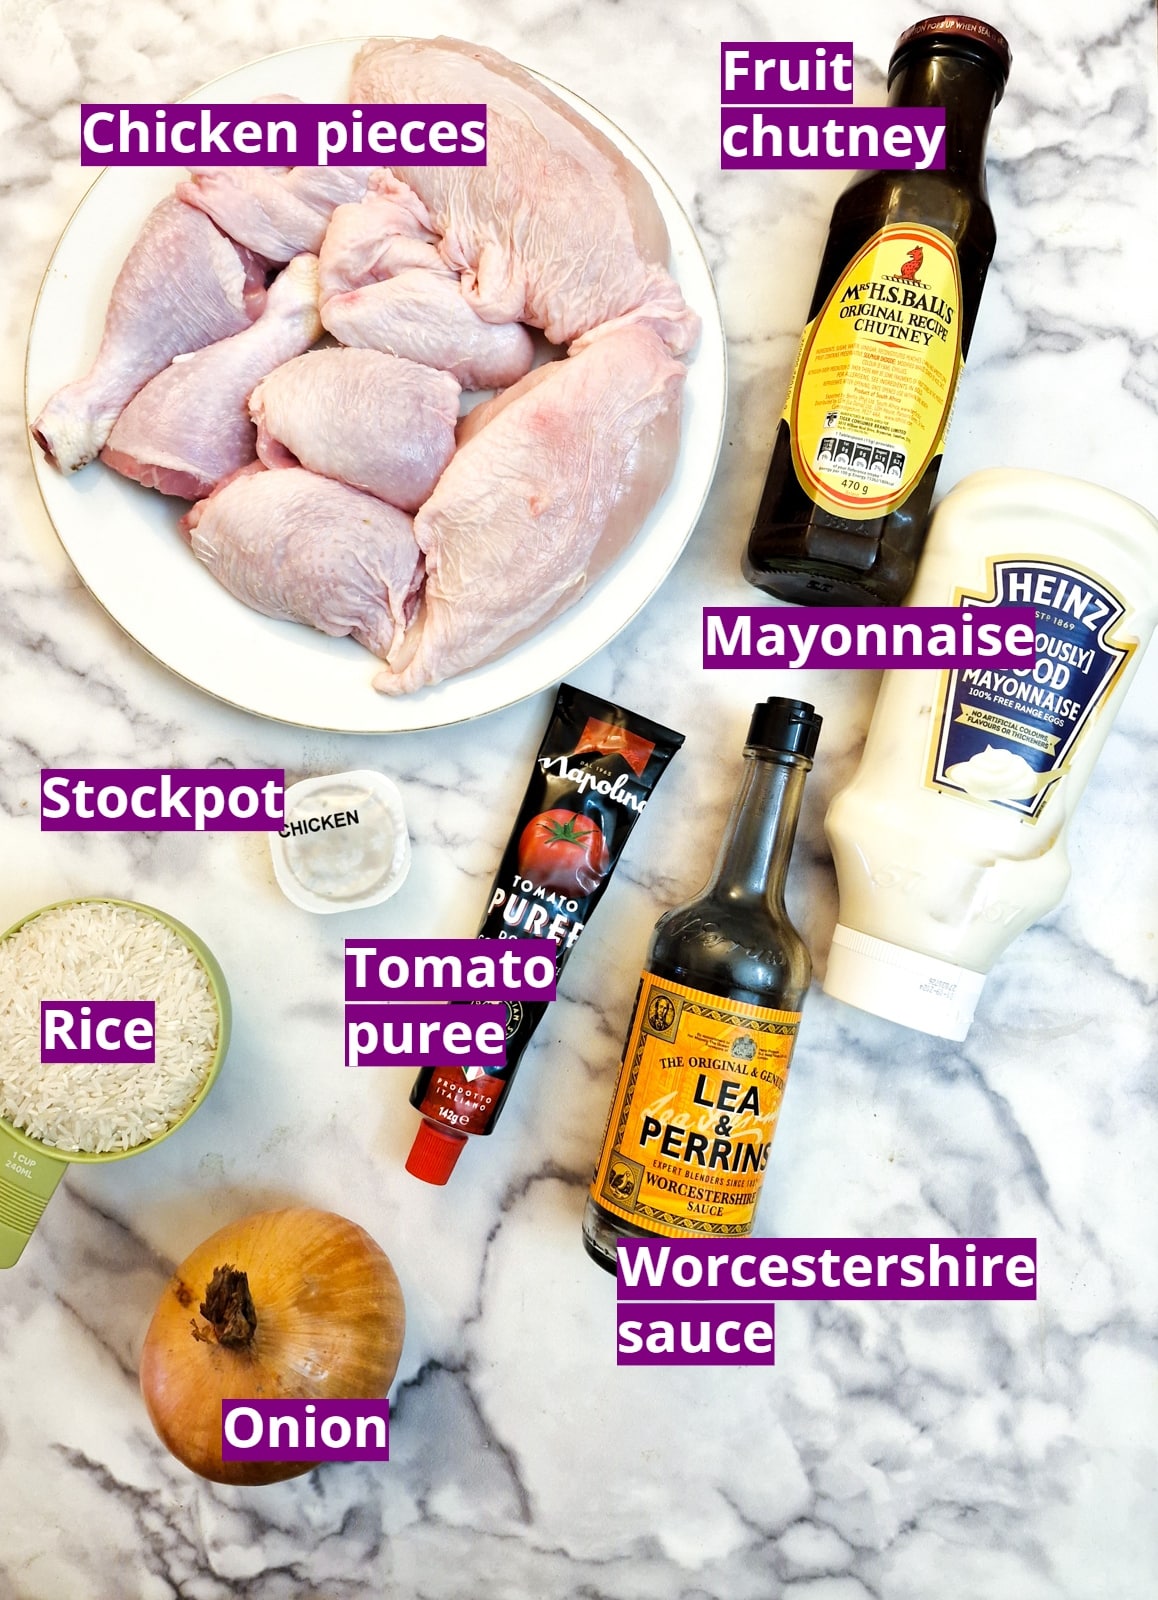 Ingredients for chutney and mayonnaise chicken bake.